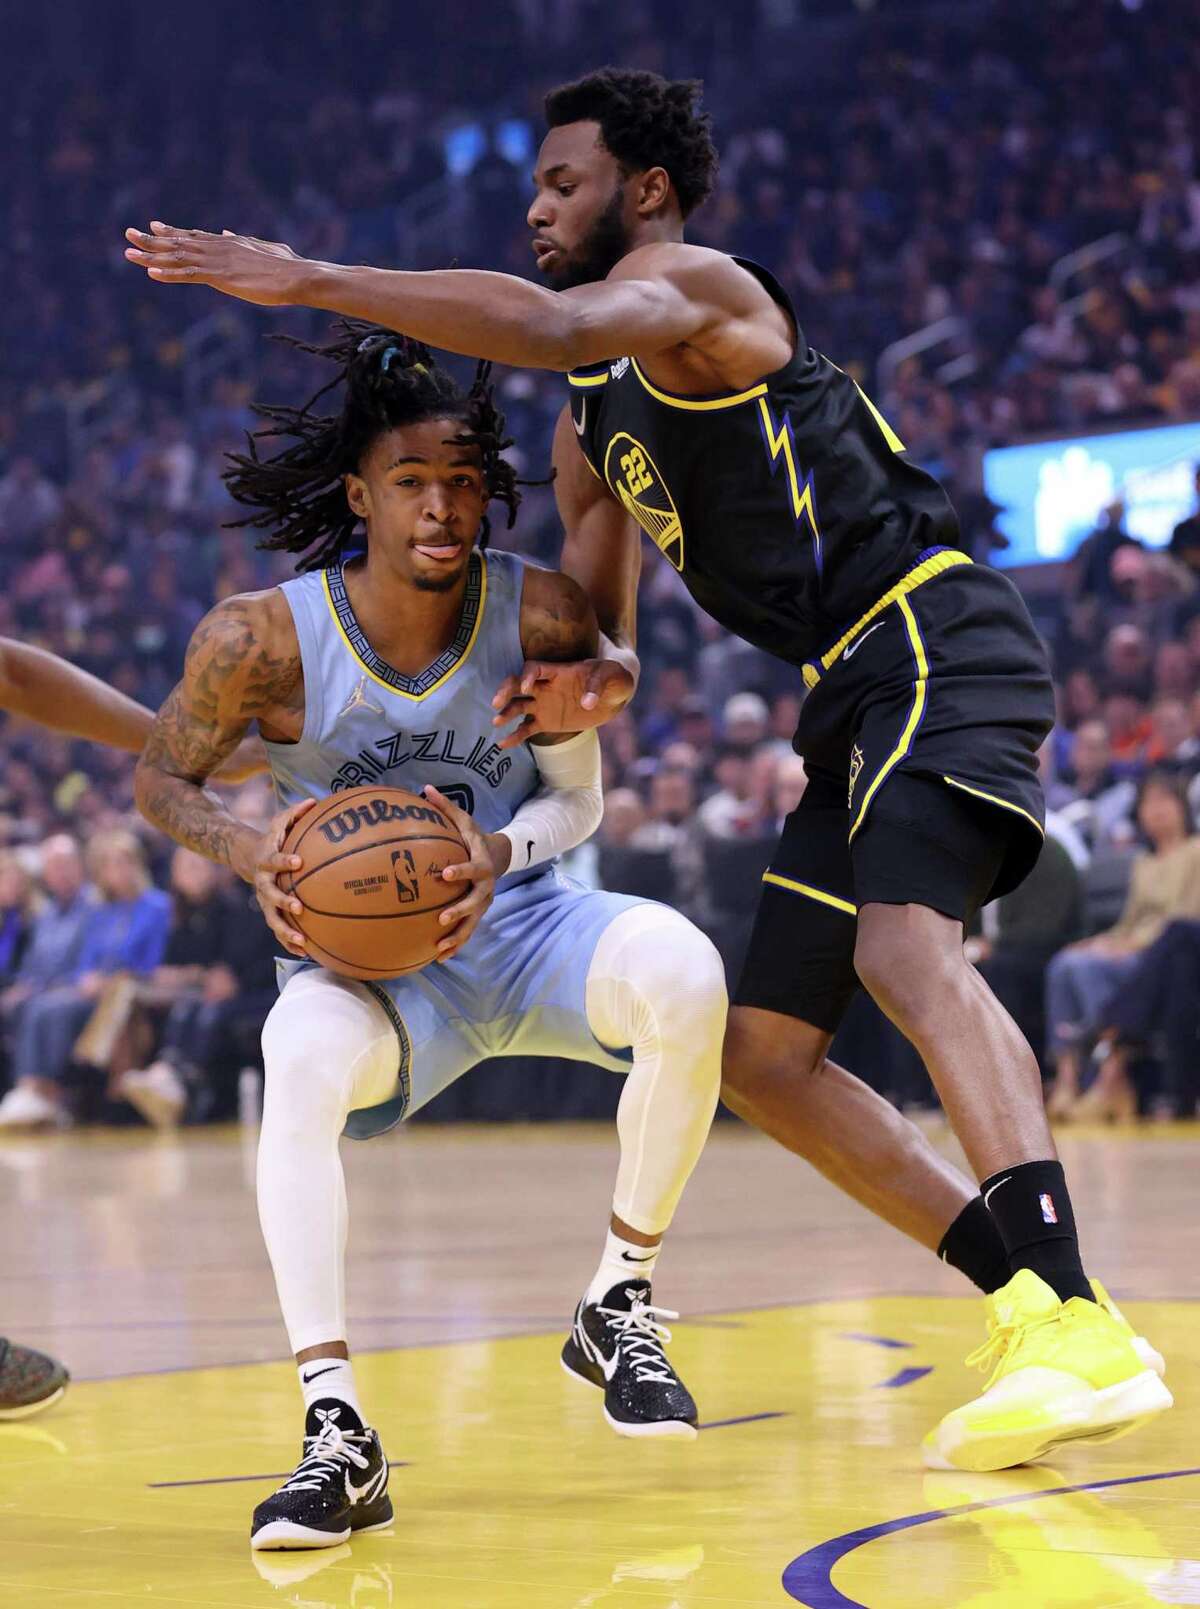 The Warriors have asked for more defense from Andrew Wiggins, here guarding Grizzlies guard Ja Morant in Game 3.